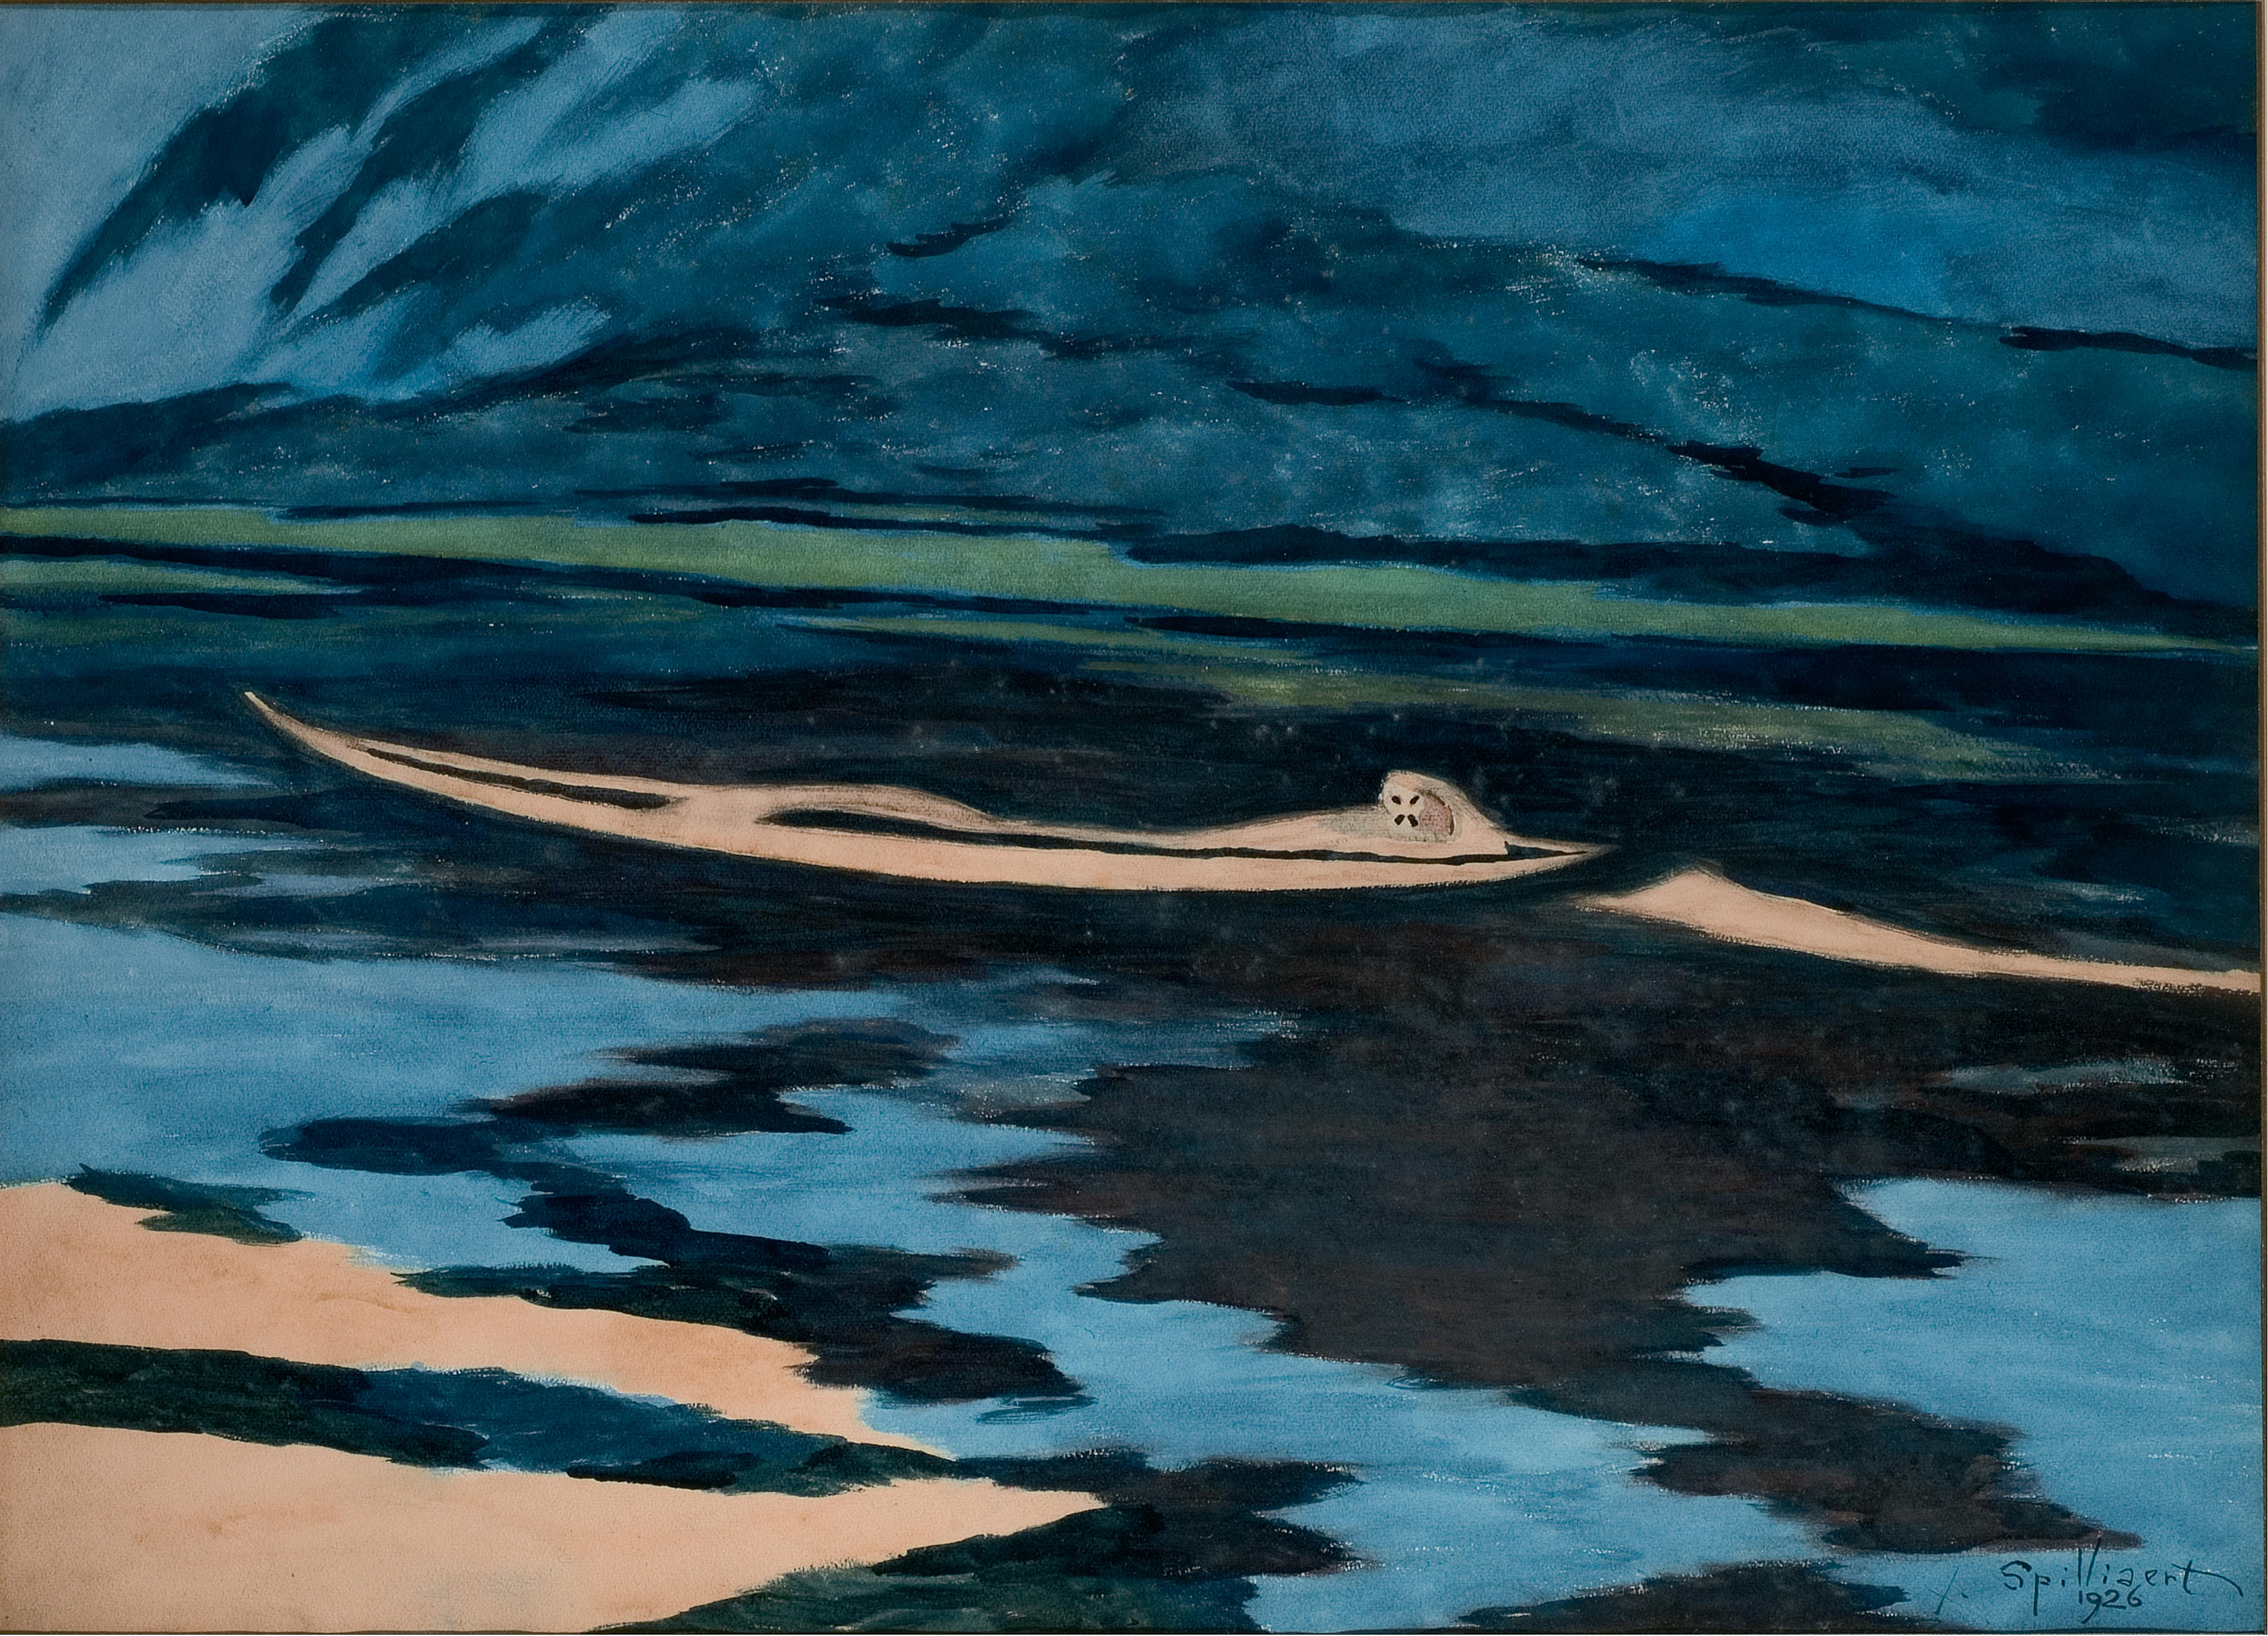 Bonhams : BONHAMS MAGAZINE:So Lonely - Léon Spilliaert's mysterious  paintings are redolent of melancholy and solitude. Unregarded in his own  lifetime, he is the perfect artist for our times, says Adrian Locke